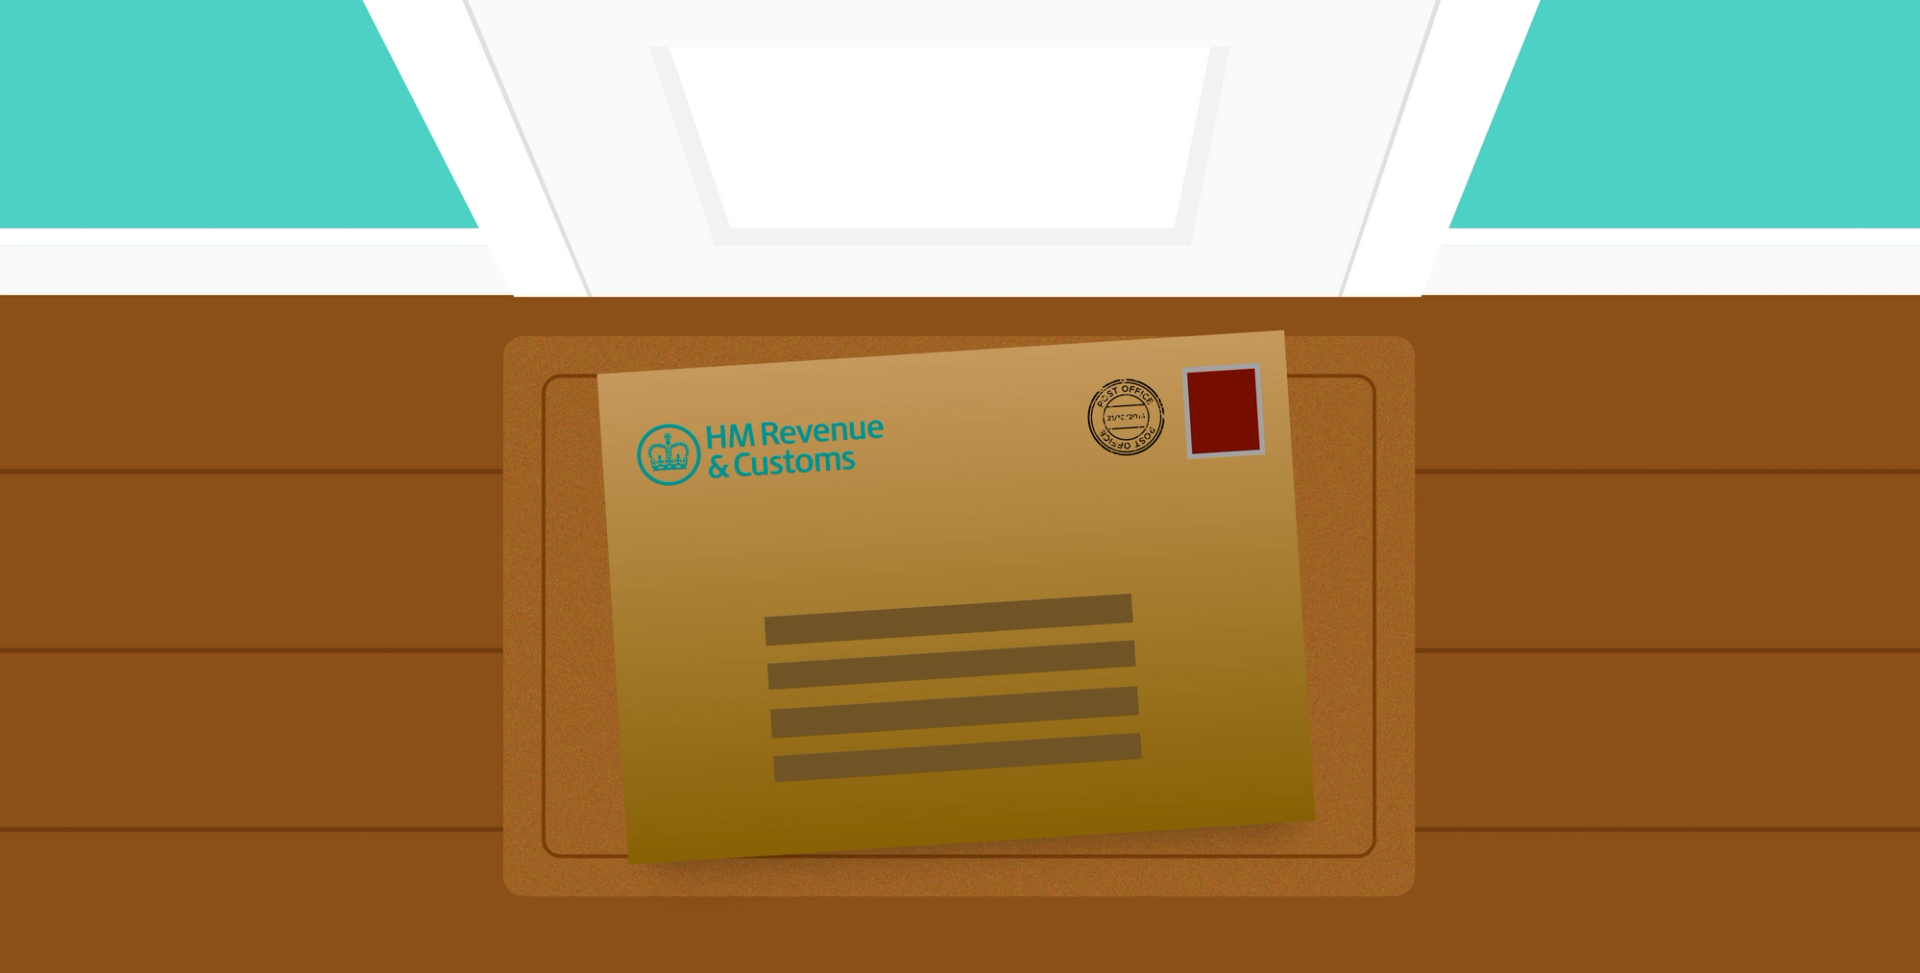 A brown envelope on a doormat with a HMRC logo